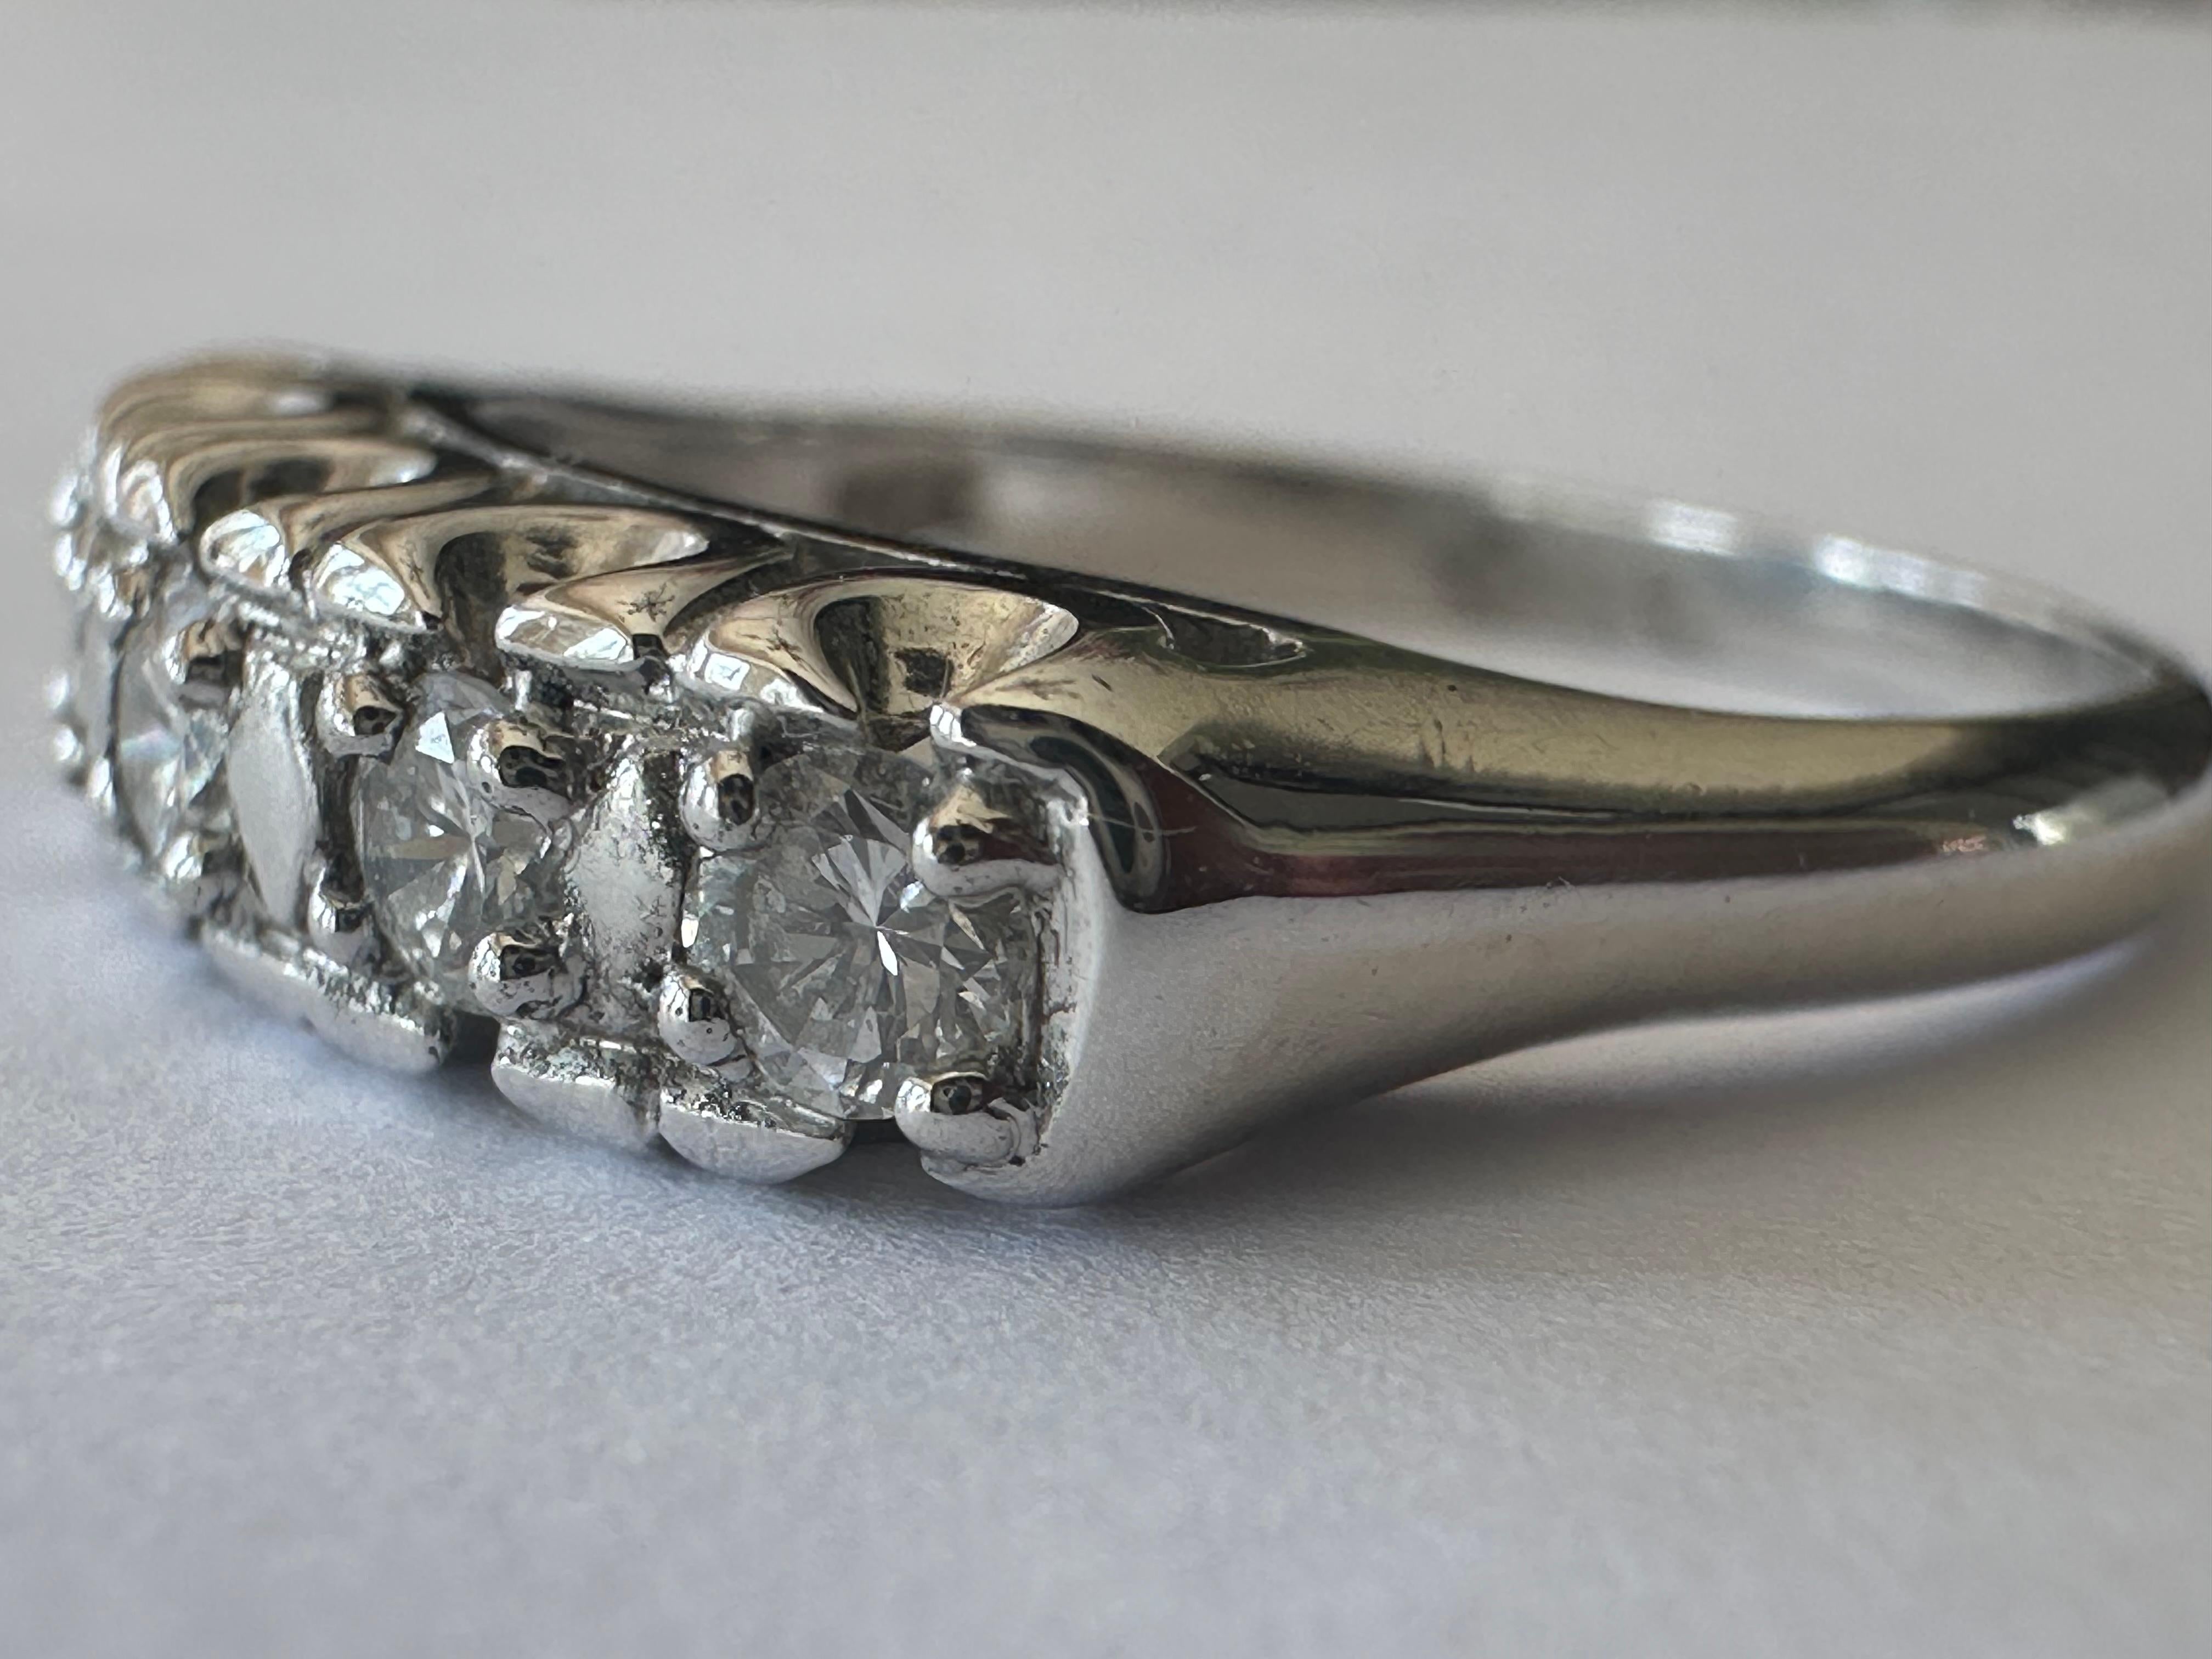 Five round brilliant-cut diamonds totaling approximately 0.50 carats F color VS clarity shimmer across the top of this classic band crafted in 14K white gold. The width of the top of the band measures 4.8mm. 